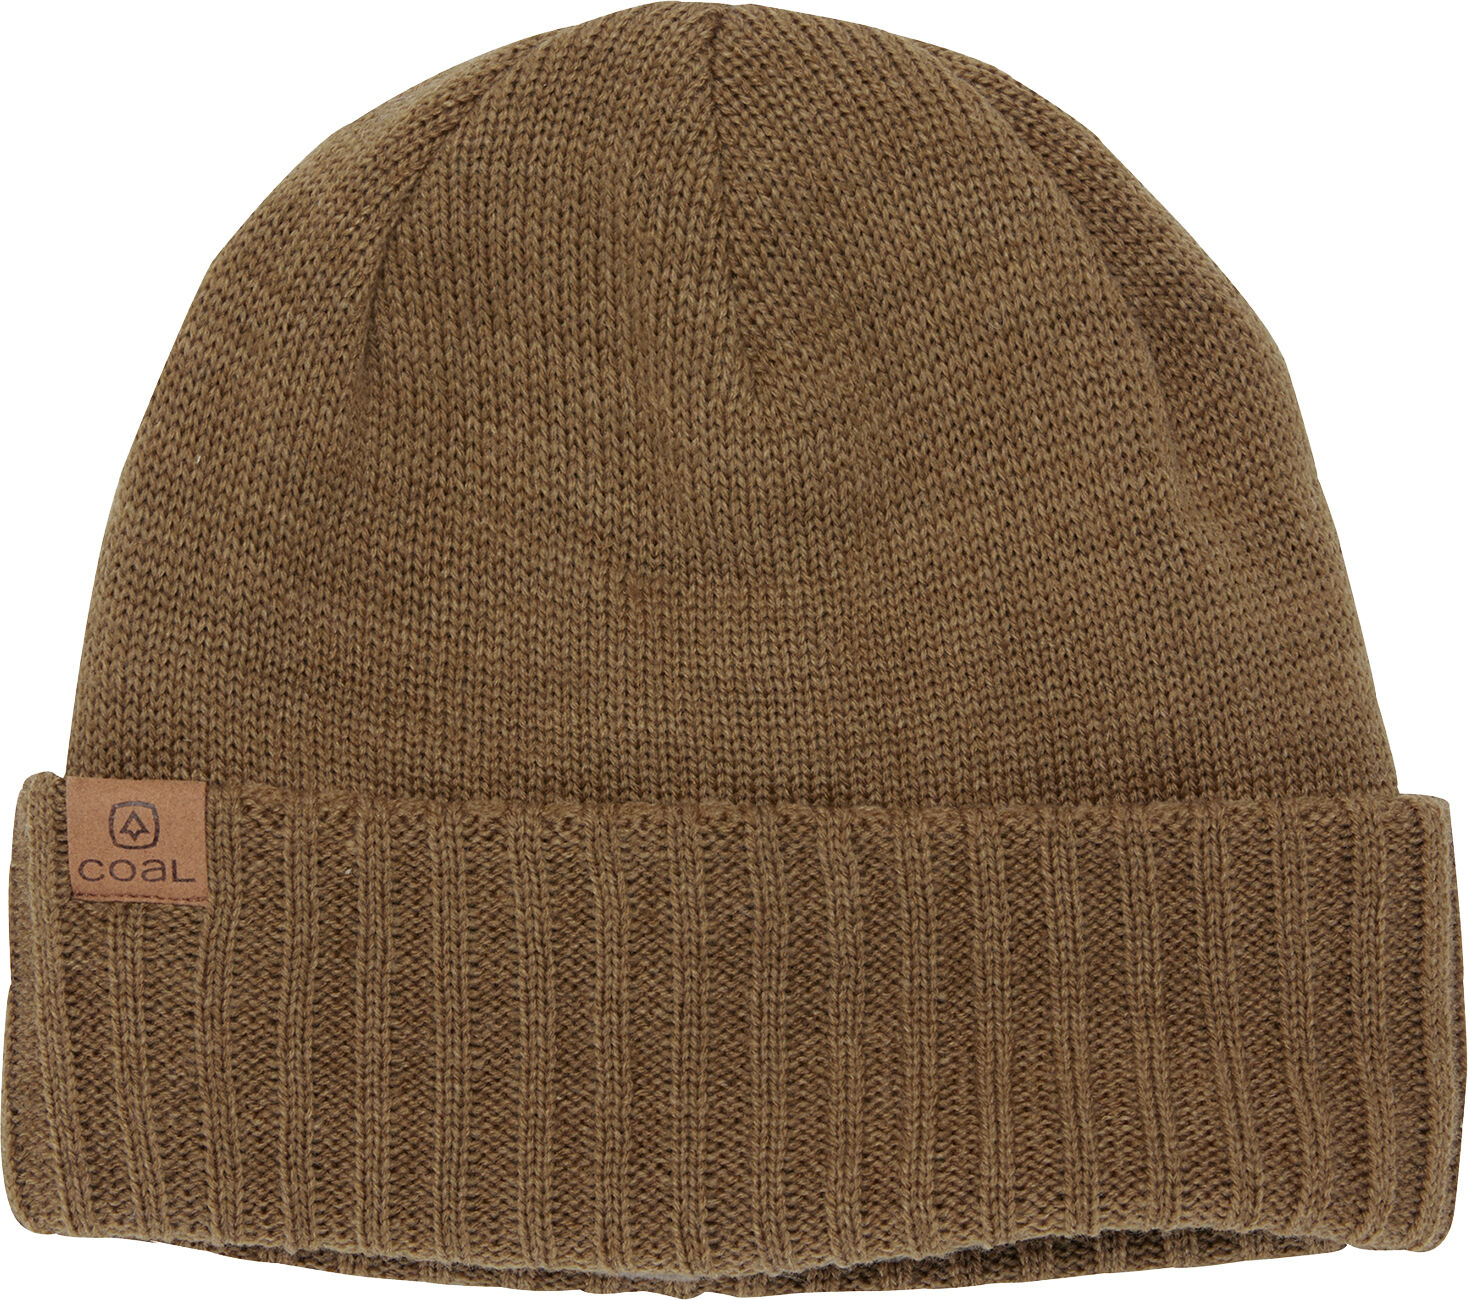 COAL THE ROGERS LIGHT BROWN One Size